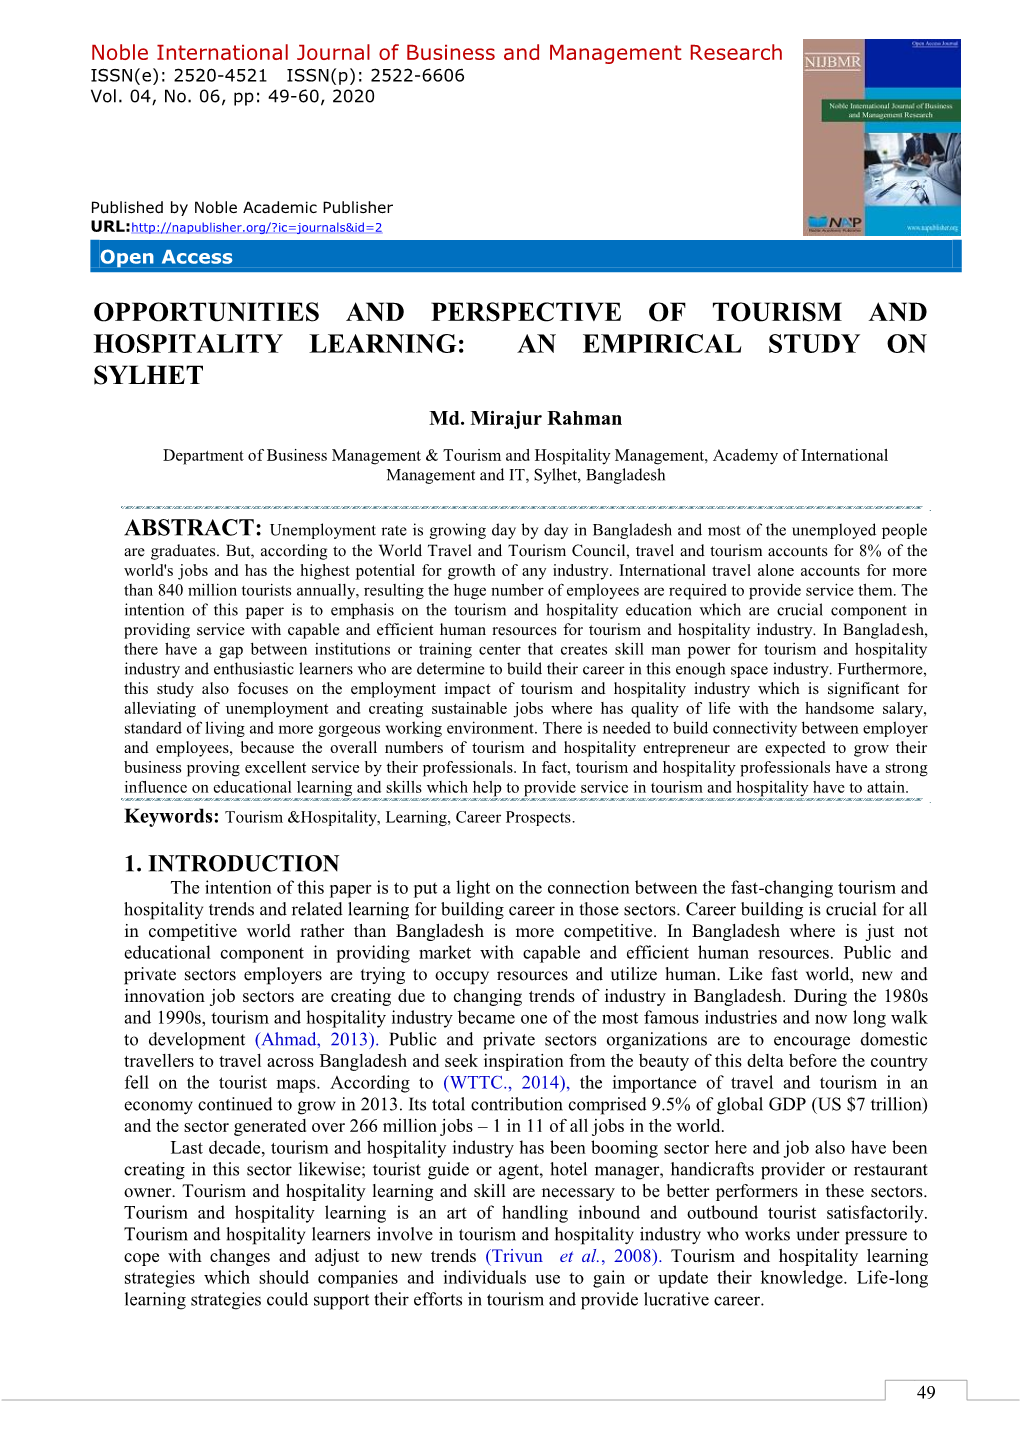 Opportunities and Perspective of Tourism and Hospitality Learning: an Empirical Study on Sylhet